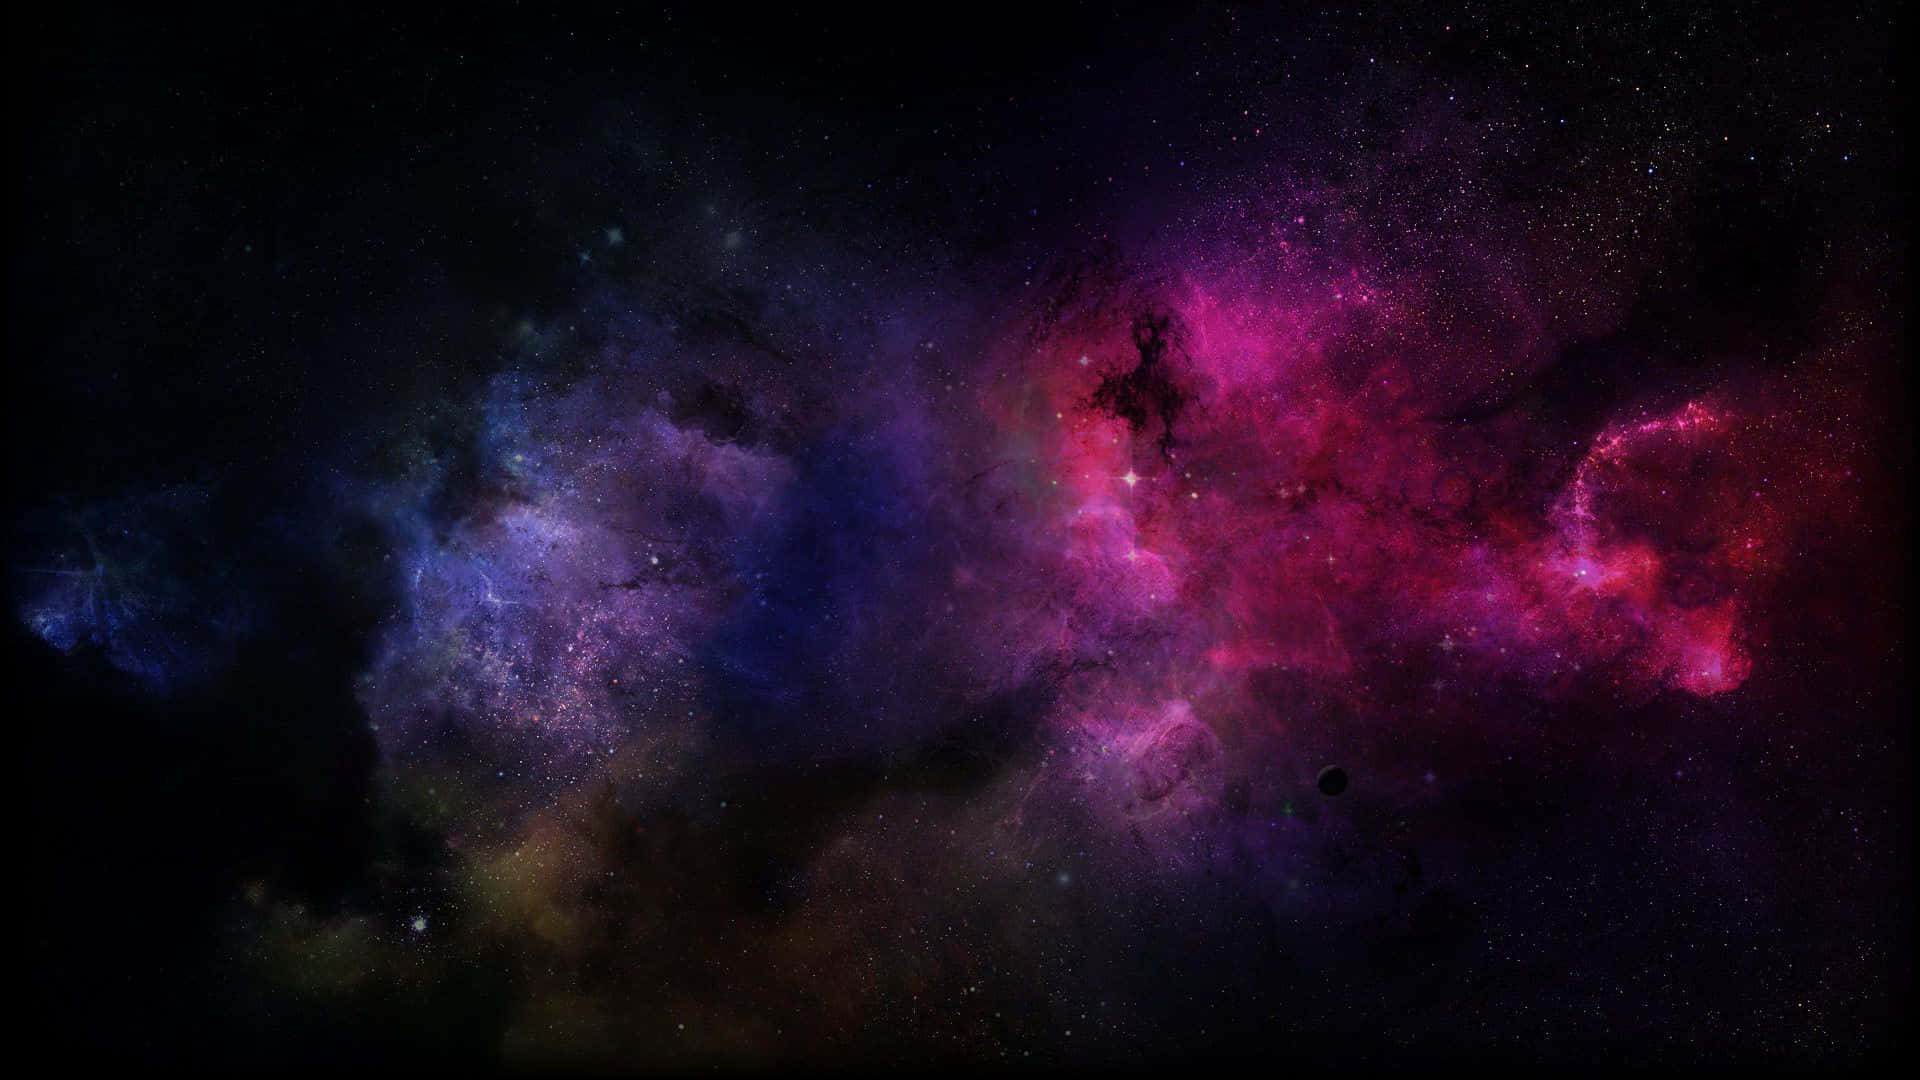 Let your dreams take flight with stunning, ornate views of the universe in Pink Space. Wallpaper